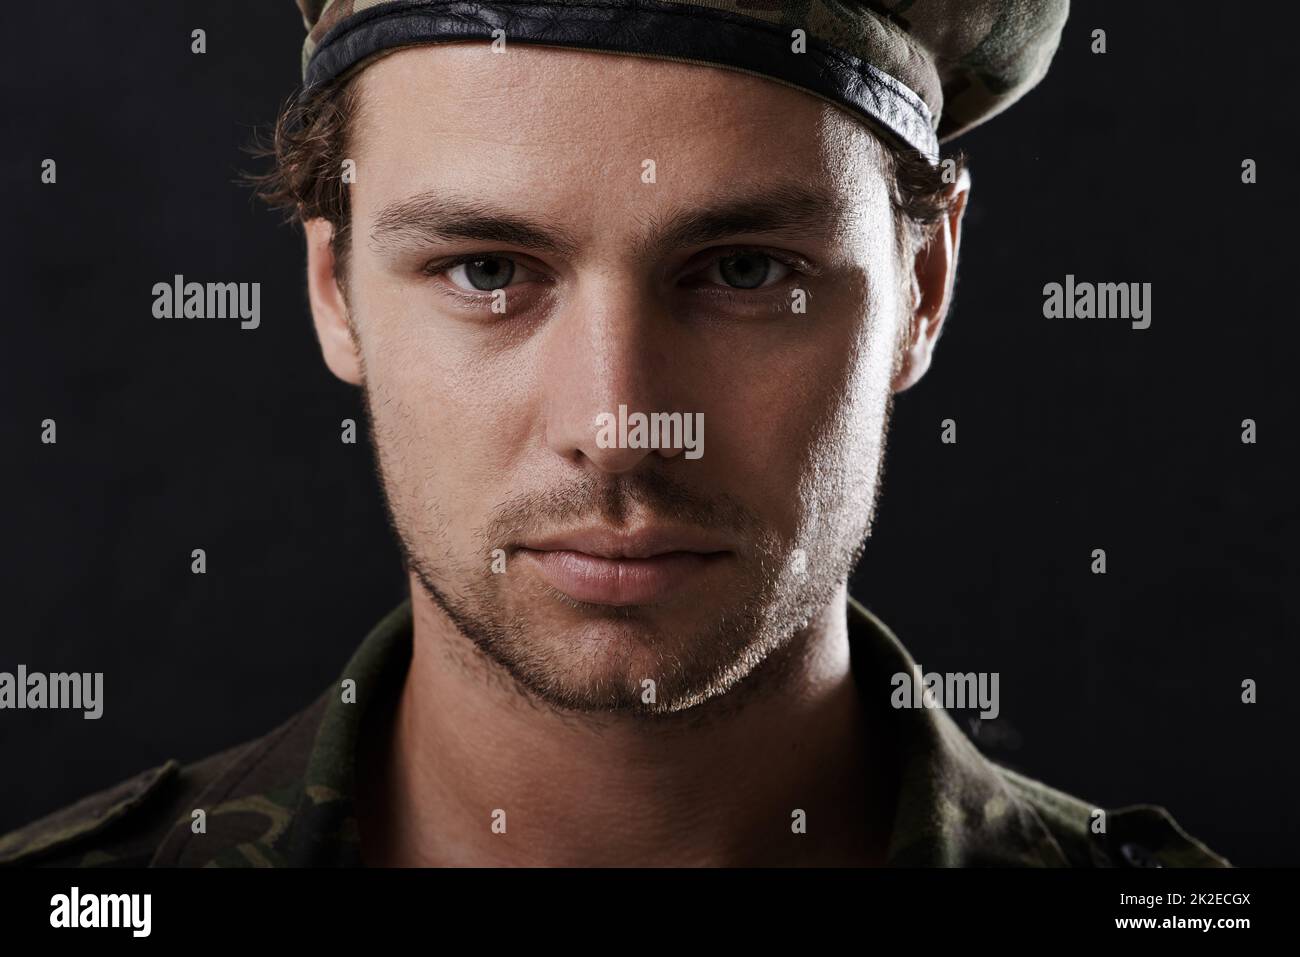 Stern soldier. Shot of a young man in military fatigues. Stock Photo